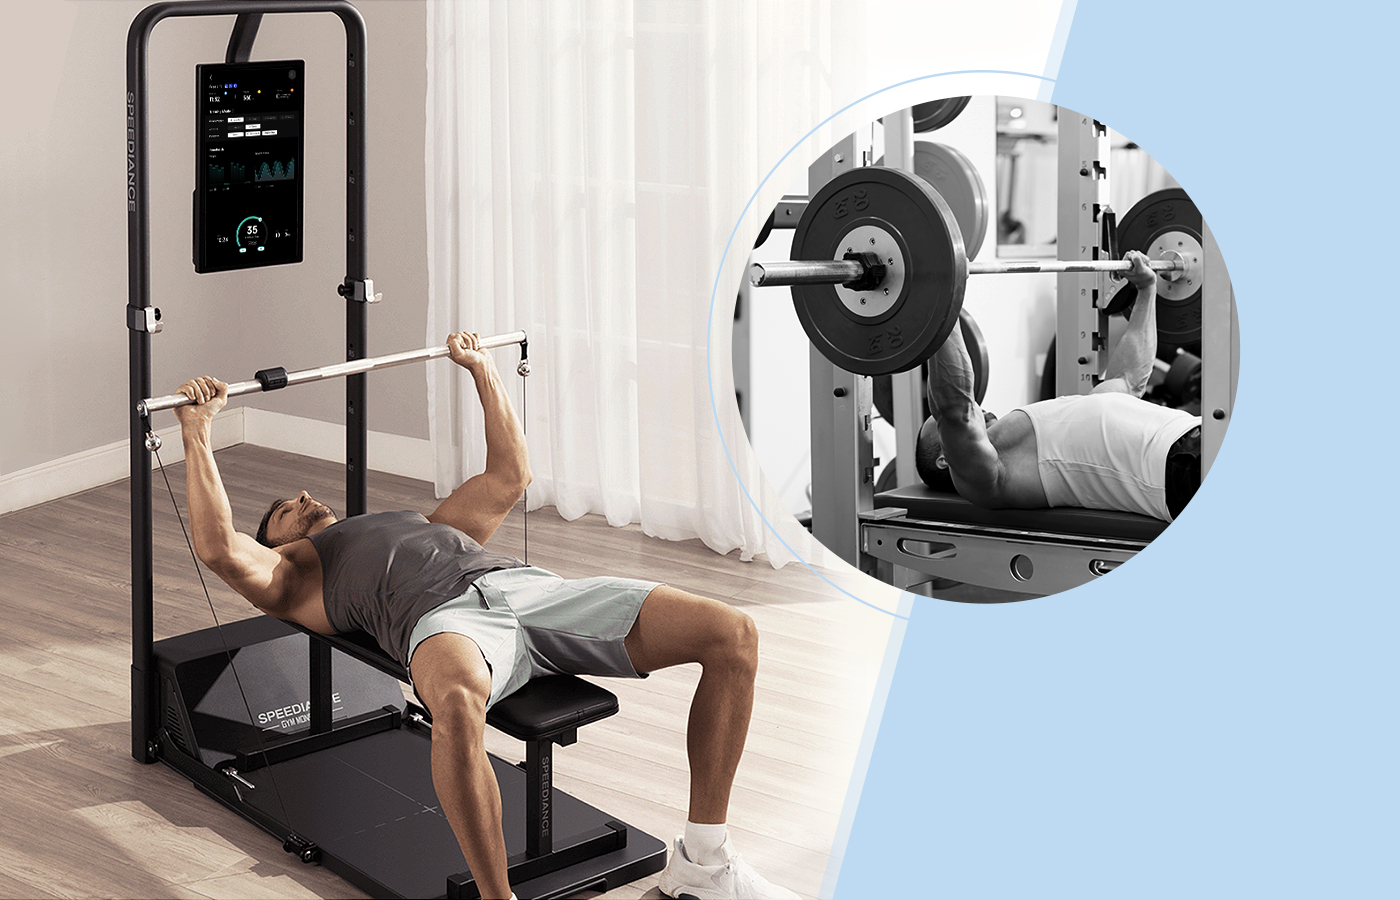 13 Pieces of Machines a Speedianced Smart Home Gym Can Replace - Speediance